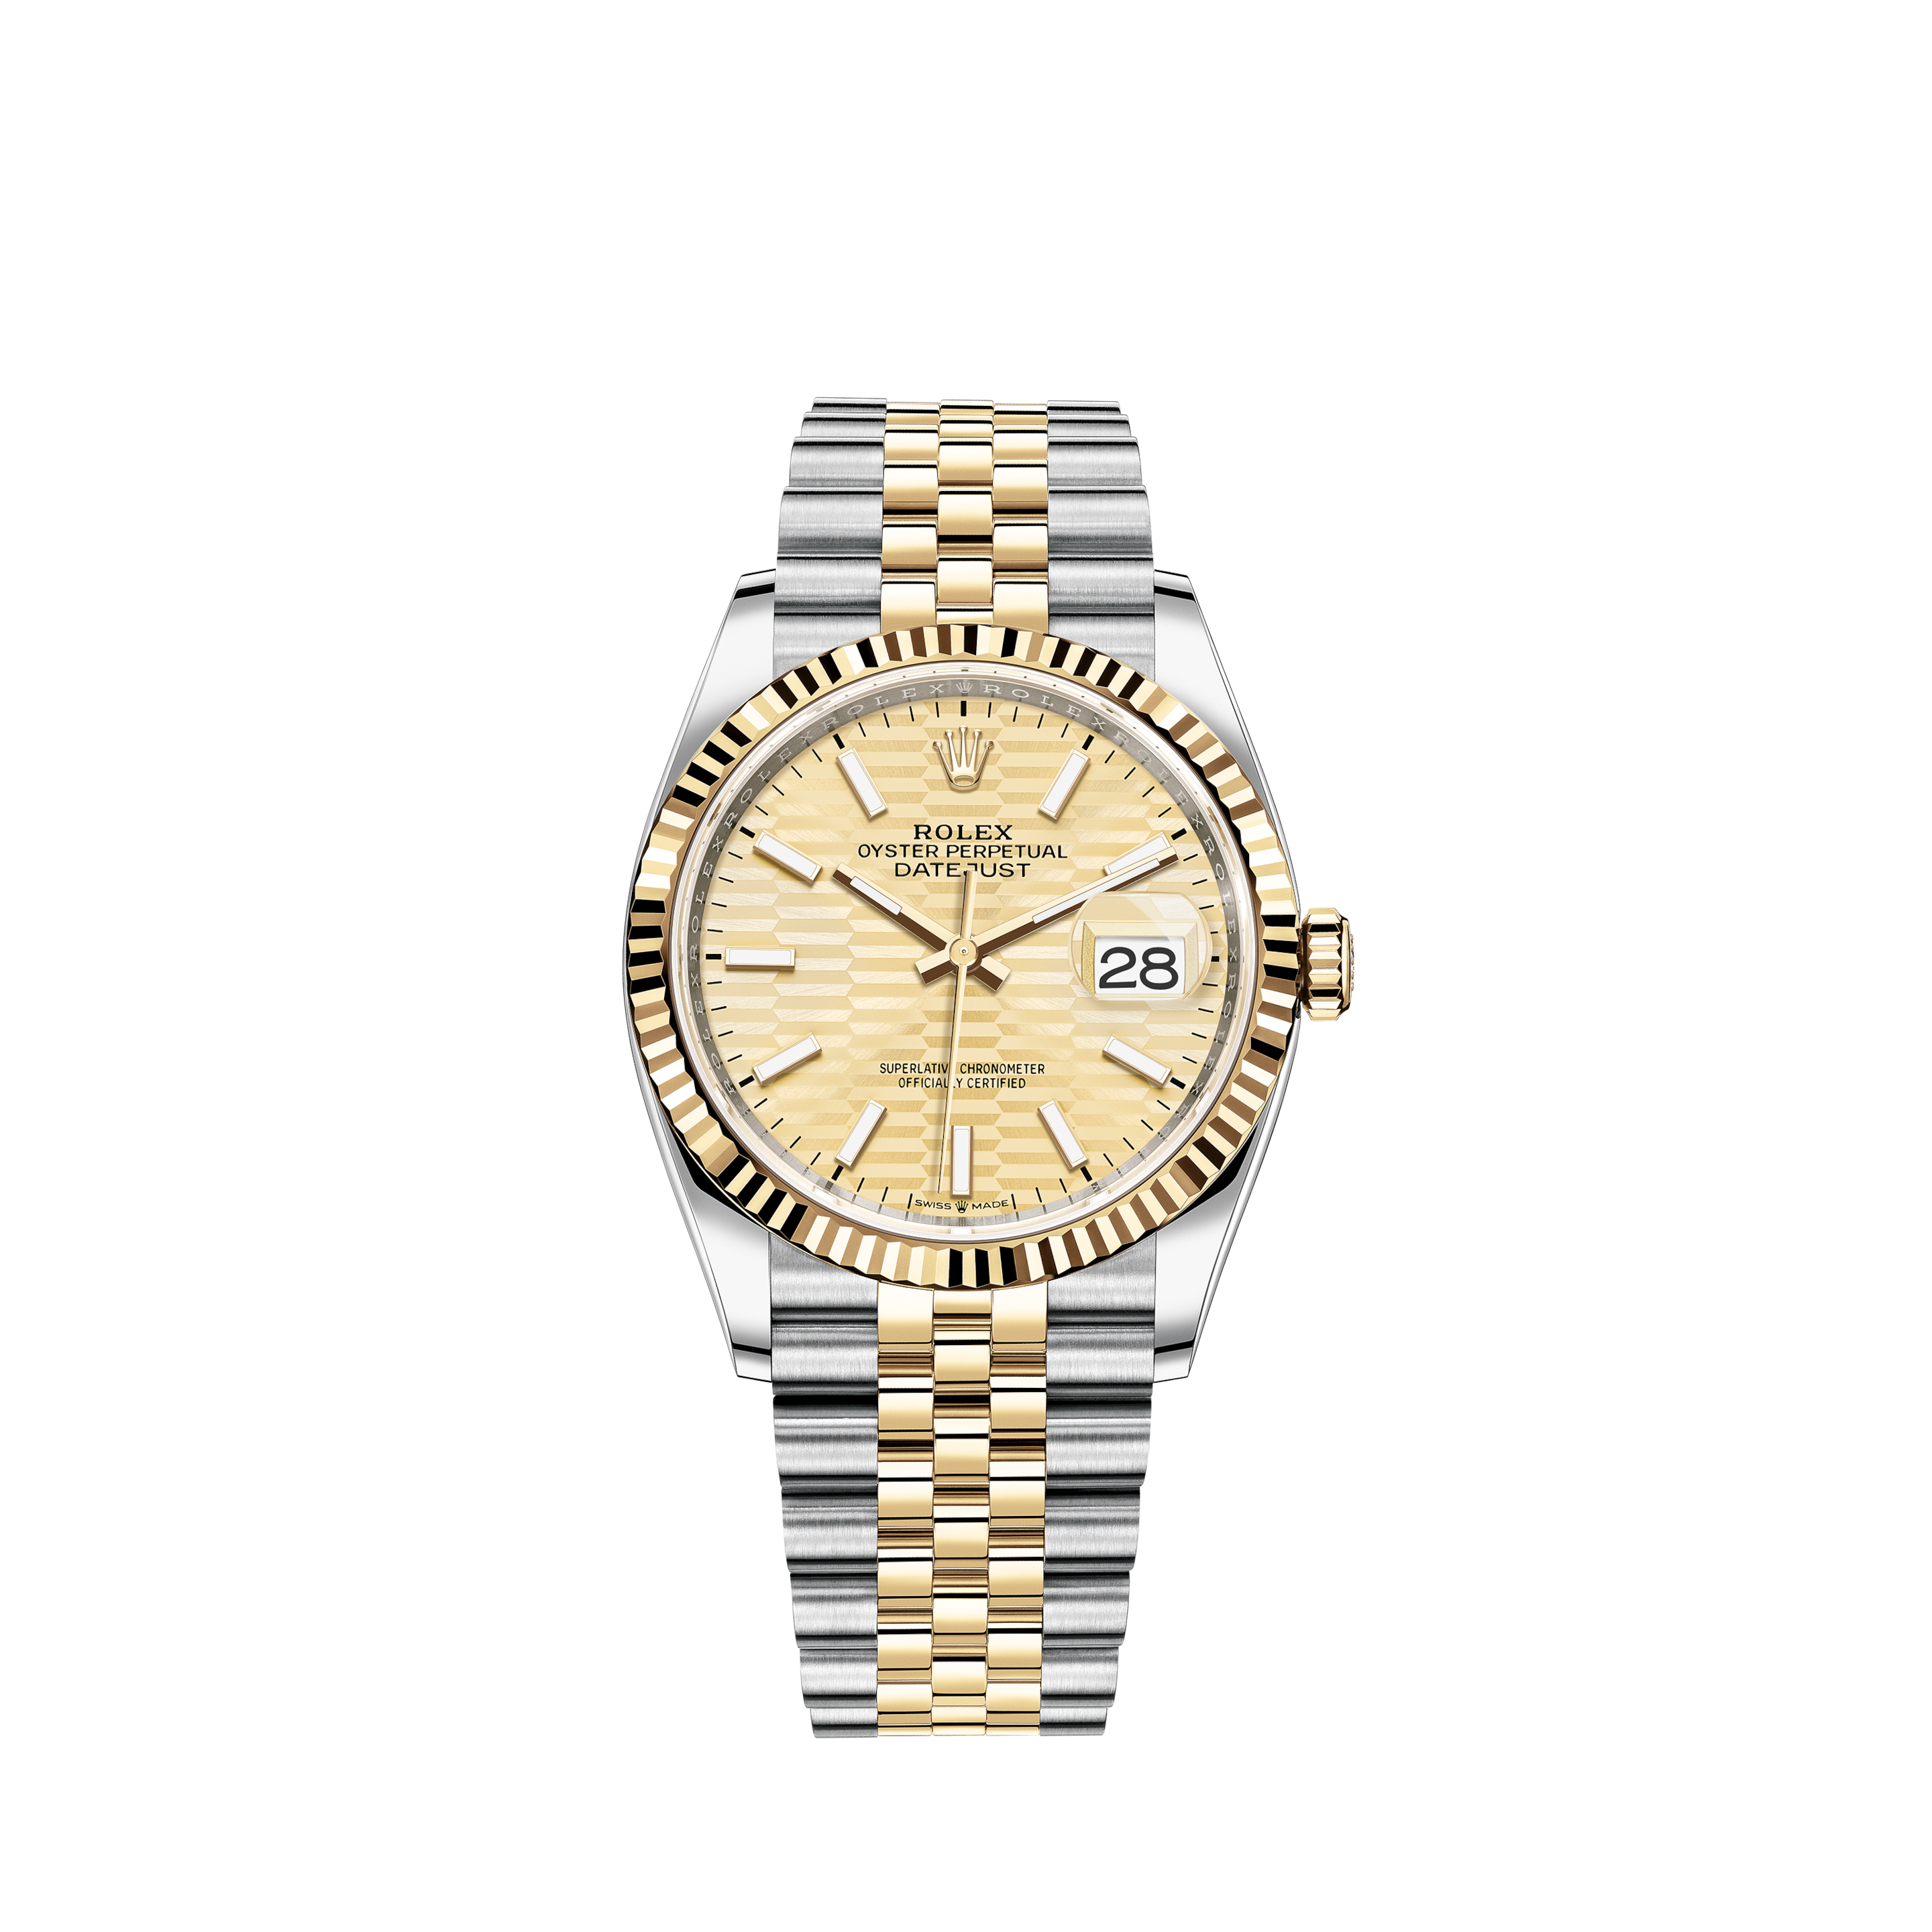 Rolex Datejust 116234 Oyster Band Silver Roman Dial & White Gold Fluted BezelRolex Datejust 116234 Oyster Band White Roman Dial & 18k White Gold Fluted Bezel